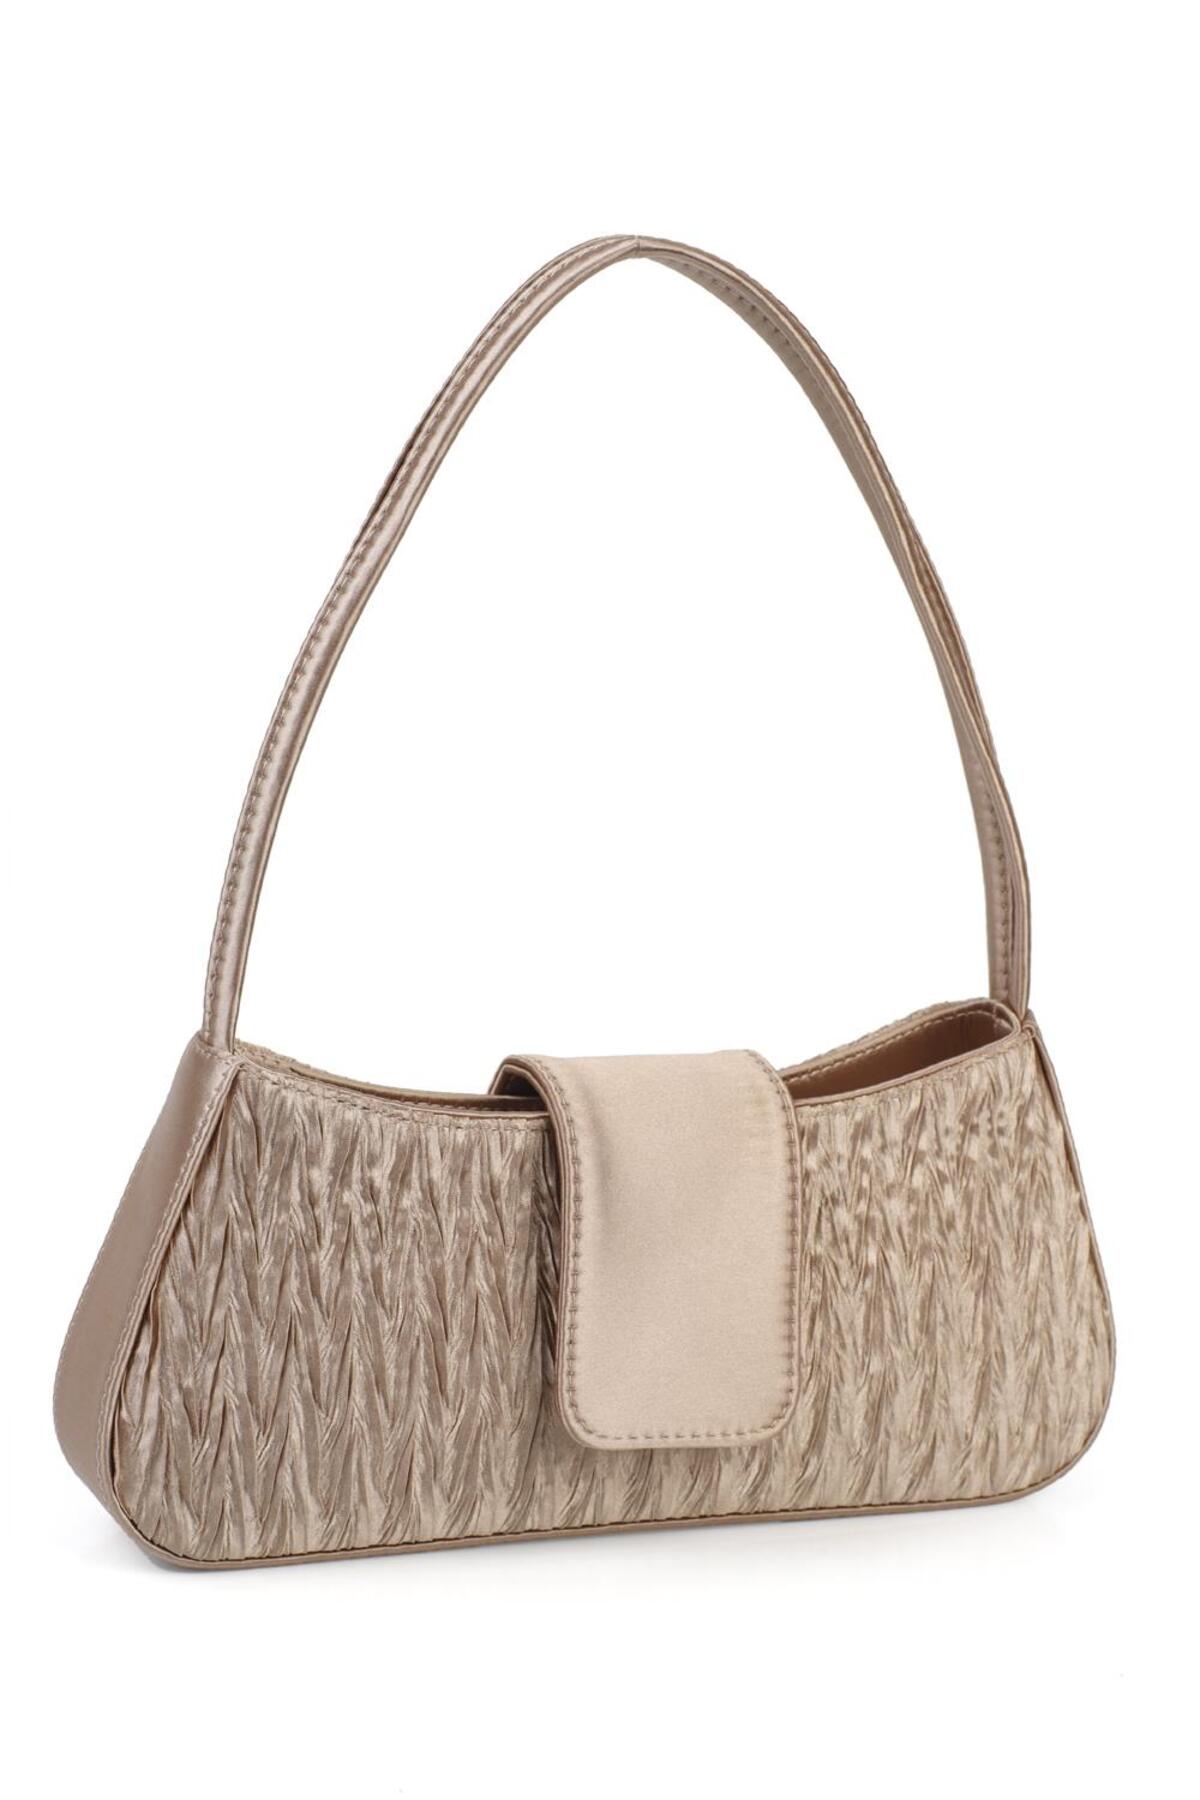 Levně Capone Outfitters Acapulco Women's Bag